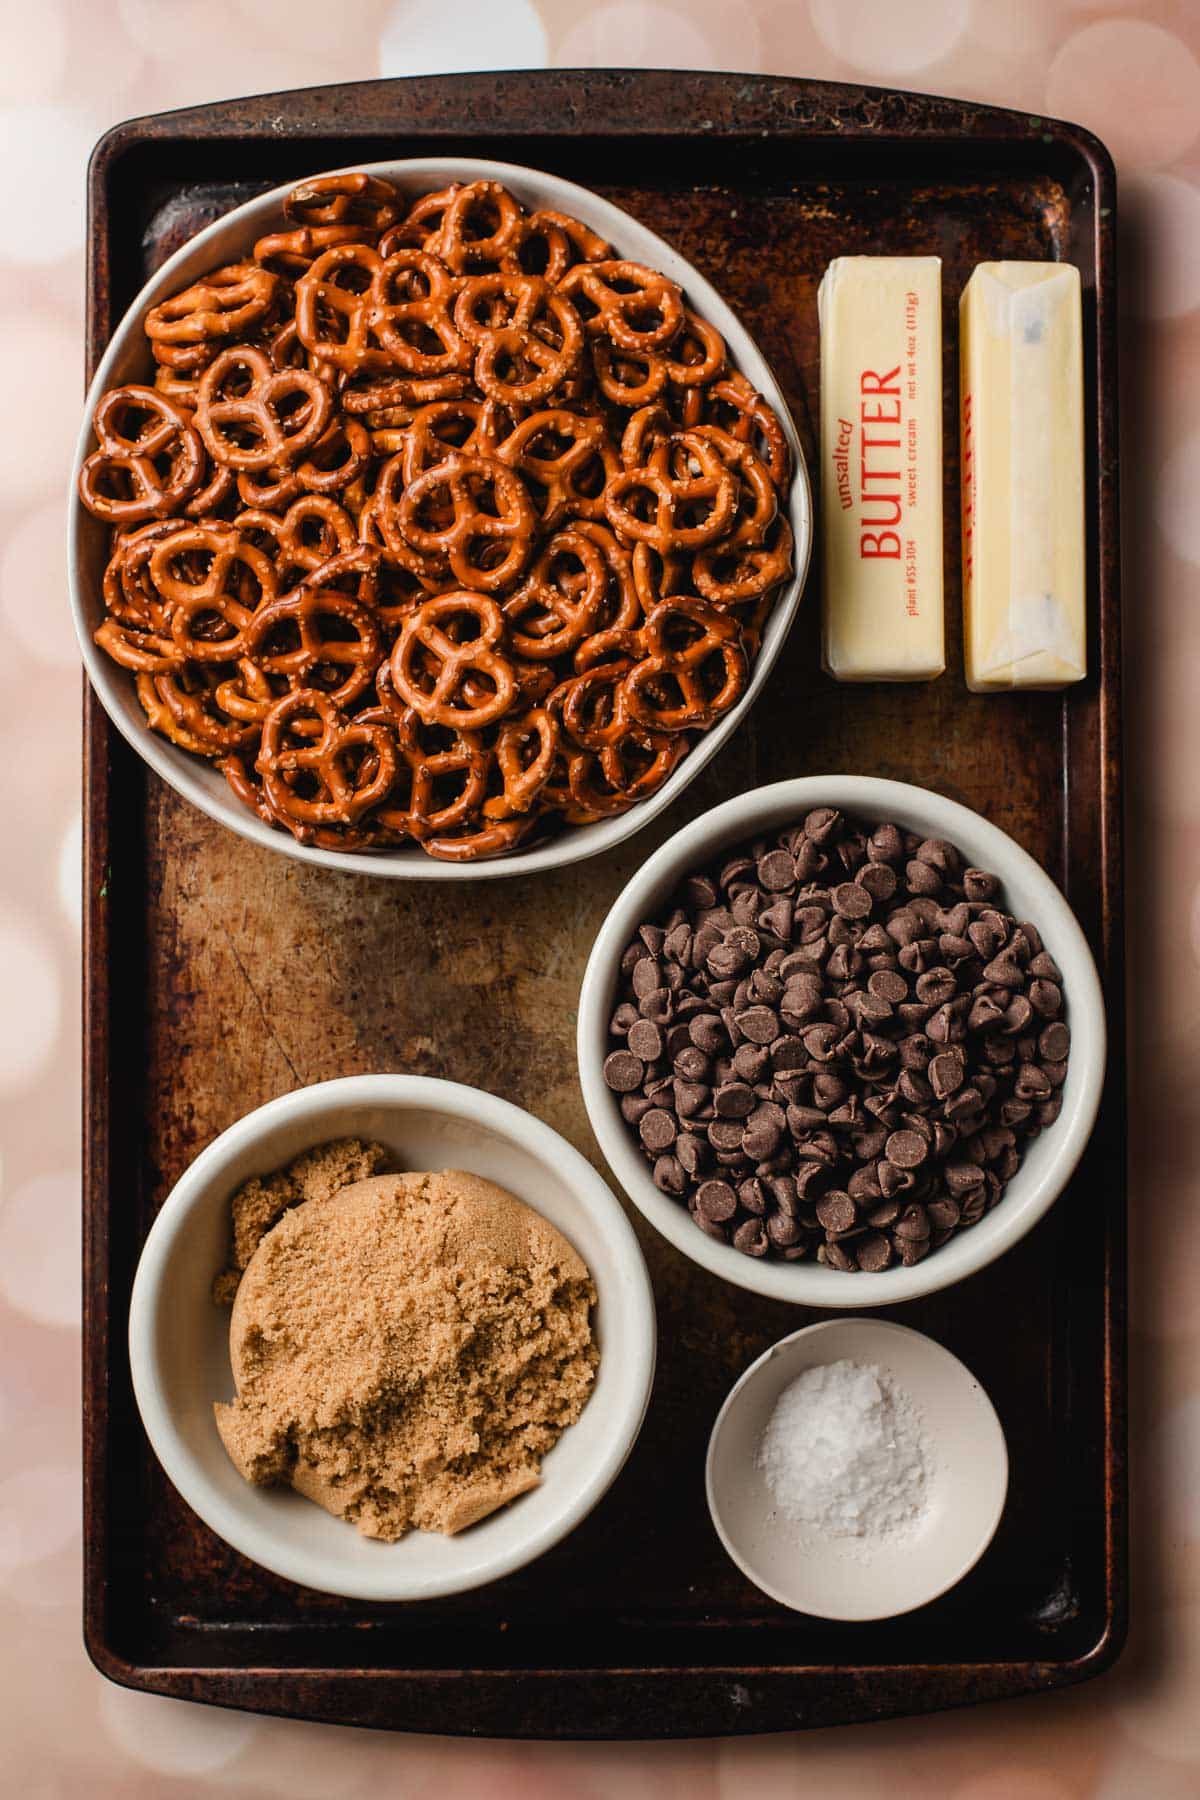 Baking sheet with chocolate chips, butter, pretzels, and brown sugar.